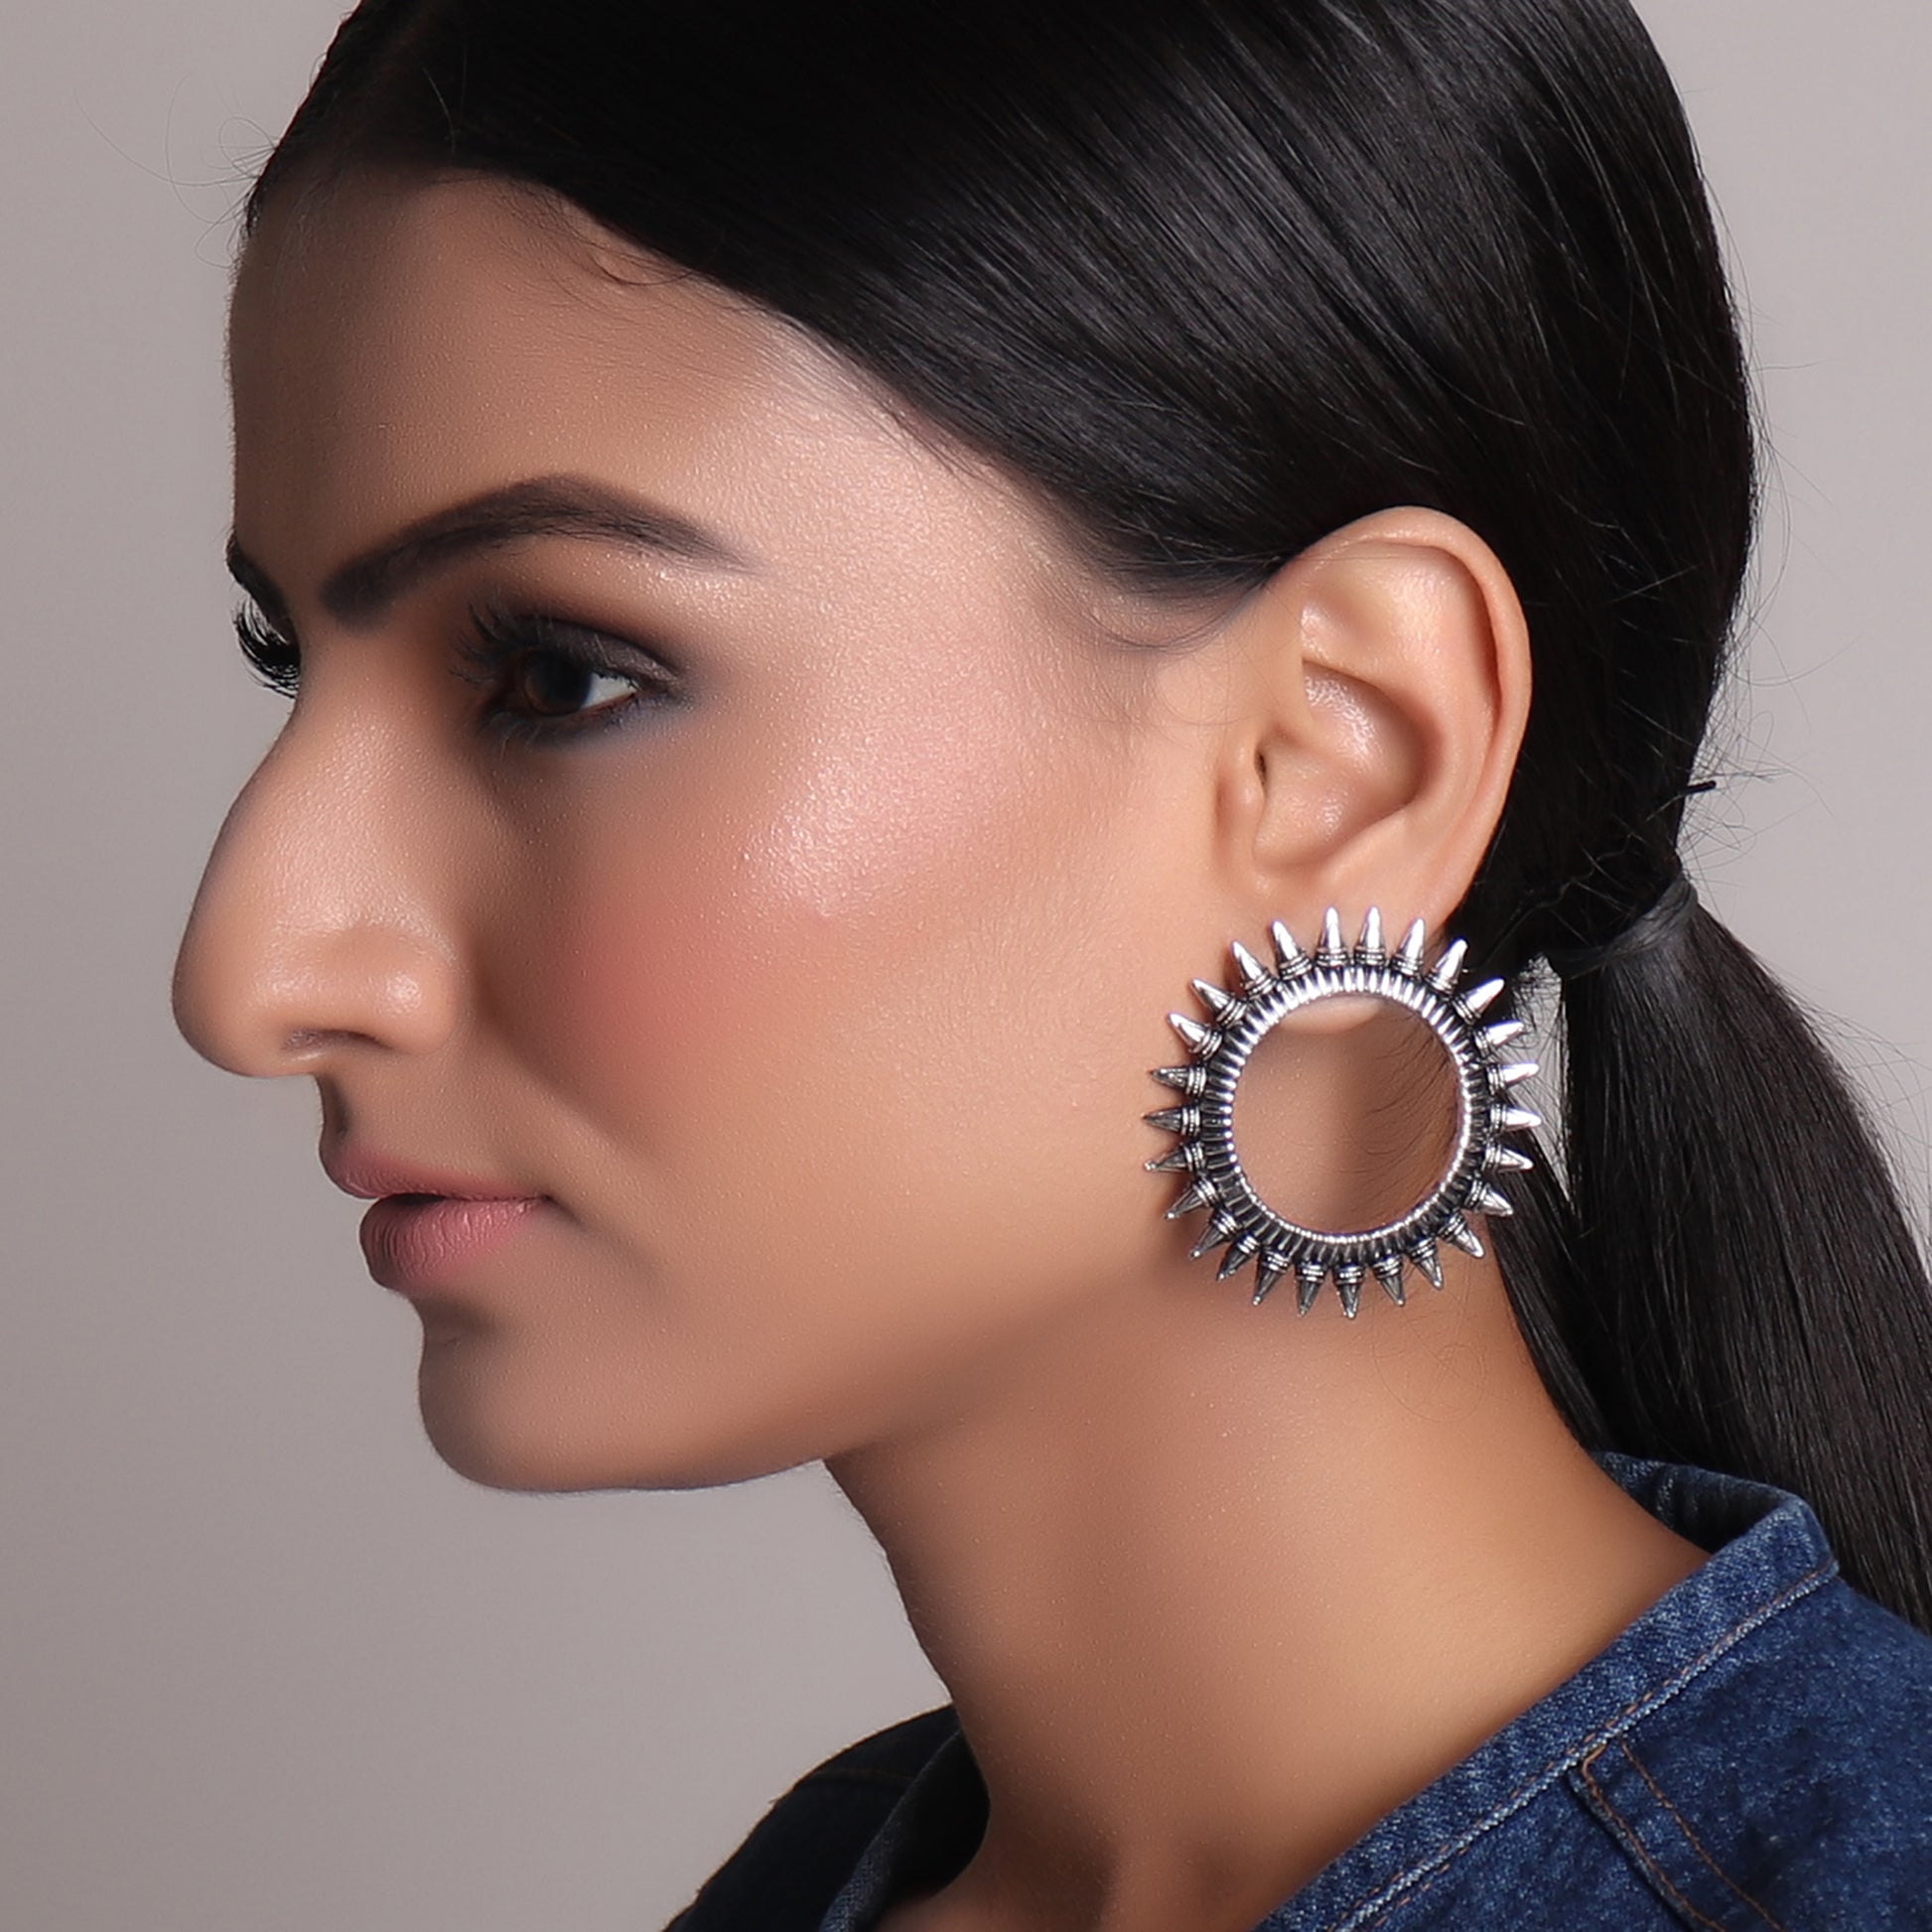 Earrings,Magnificent Moon Studs in Silver - Cippele Multi Store